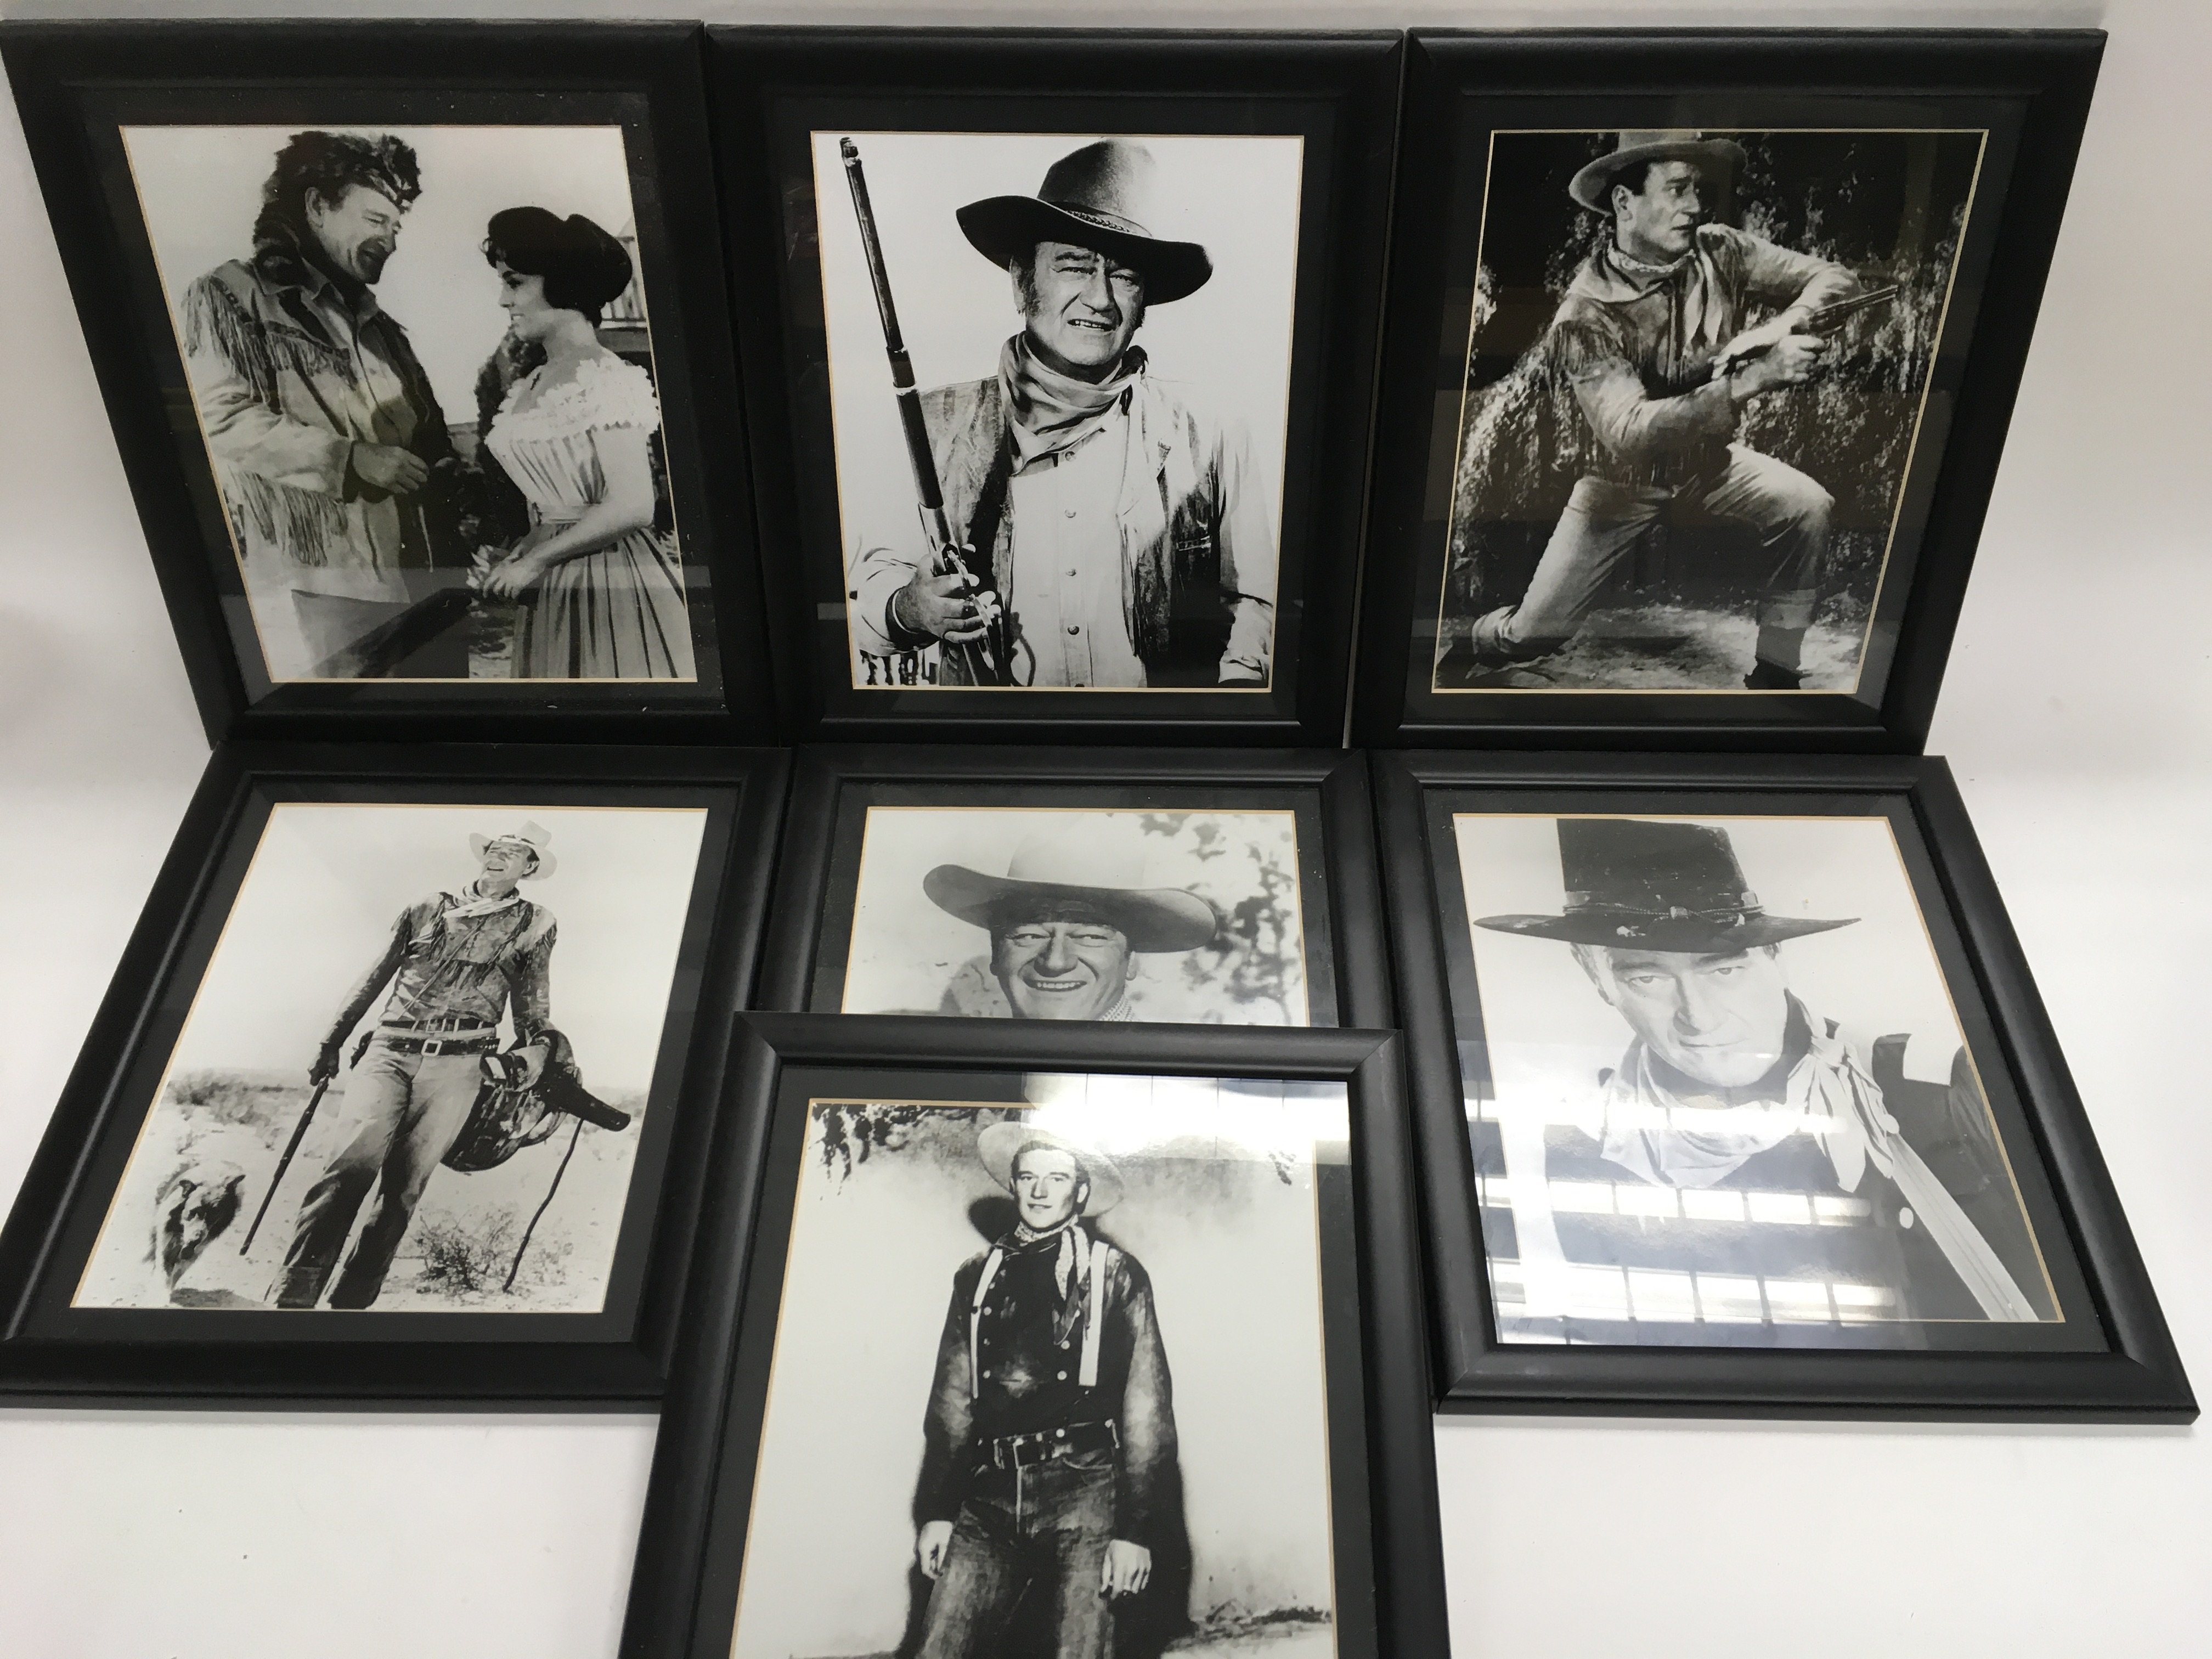 Seven framed black and white photographic prints o